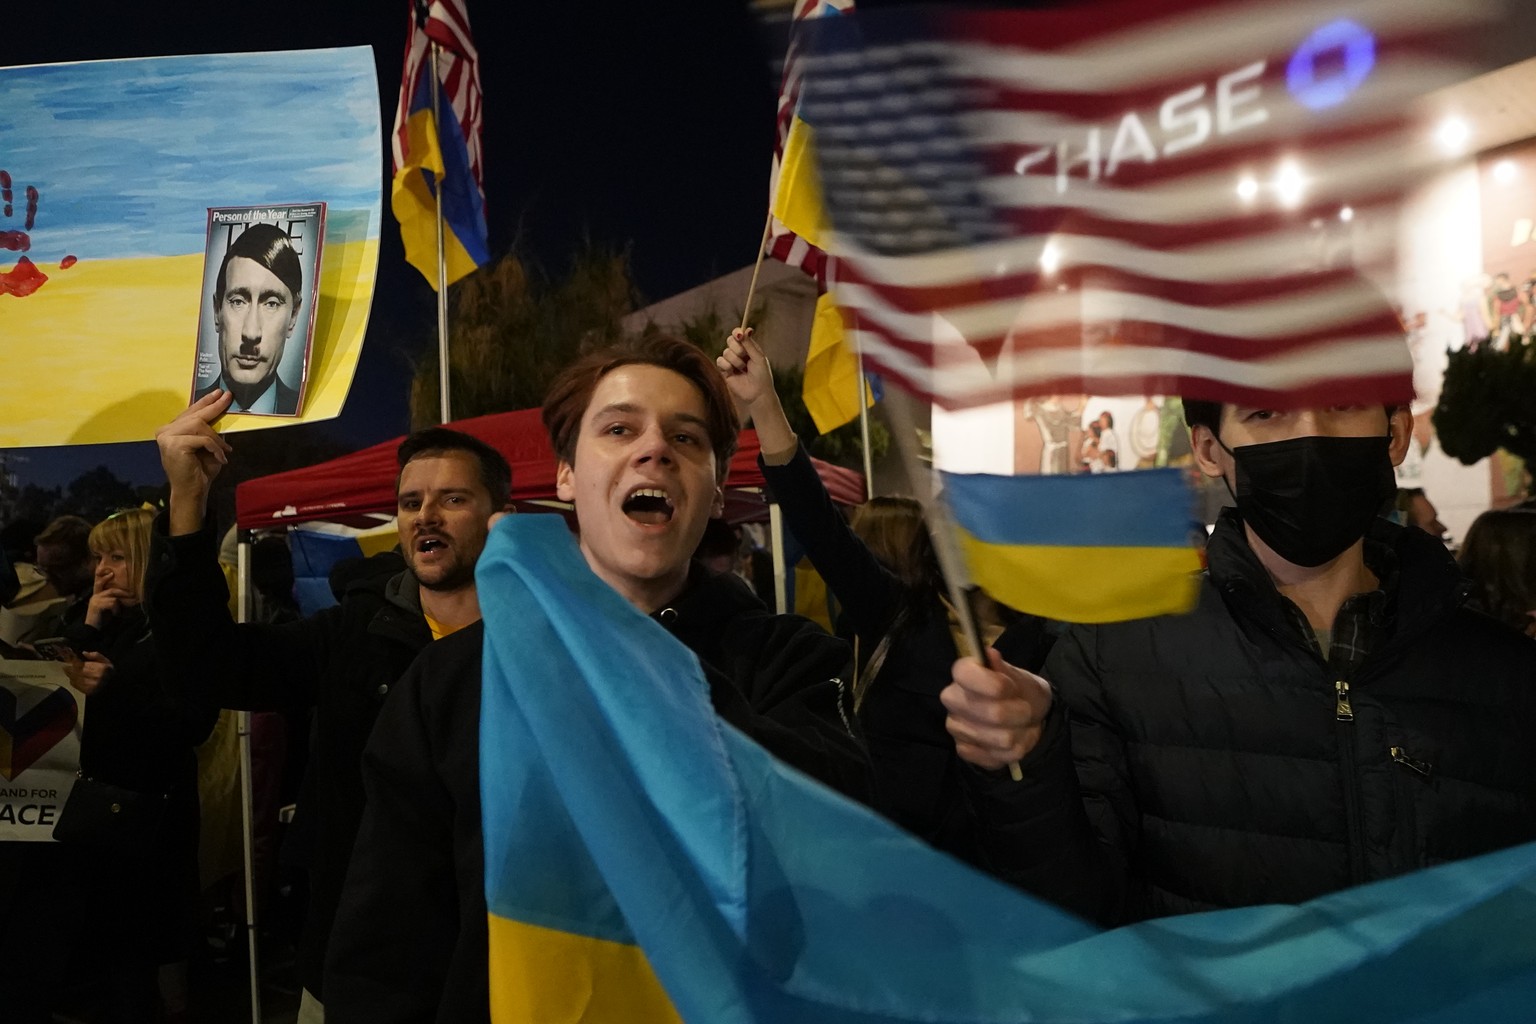 People protest the Russian invasion of Ukraine at a demonstration in the Studio City neighborhood of Los Angeles, Thursday, Feb. 24, 2022. (AP Photo/Damian Dovarganes)